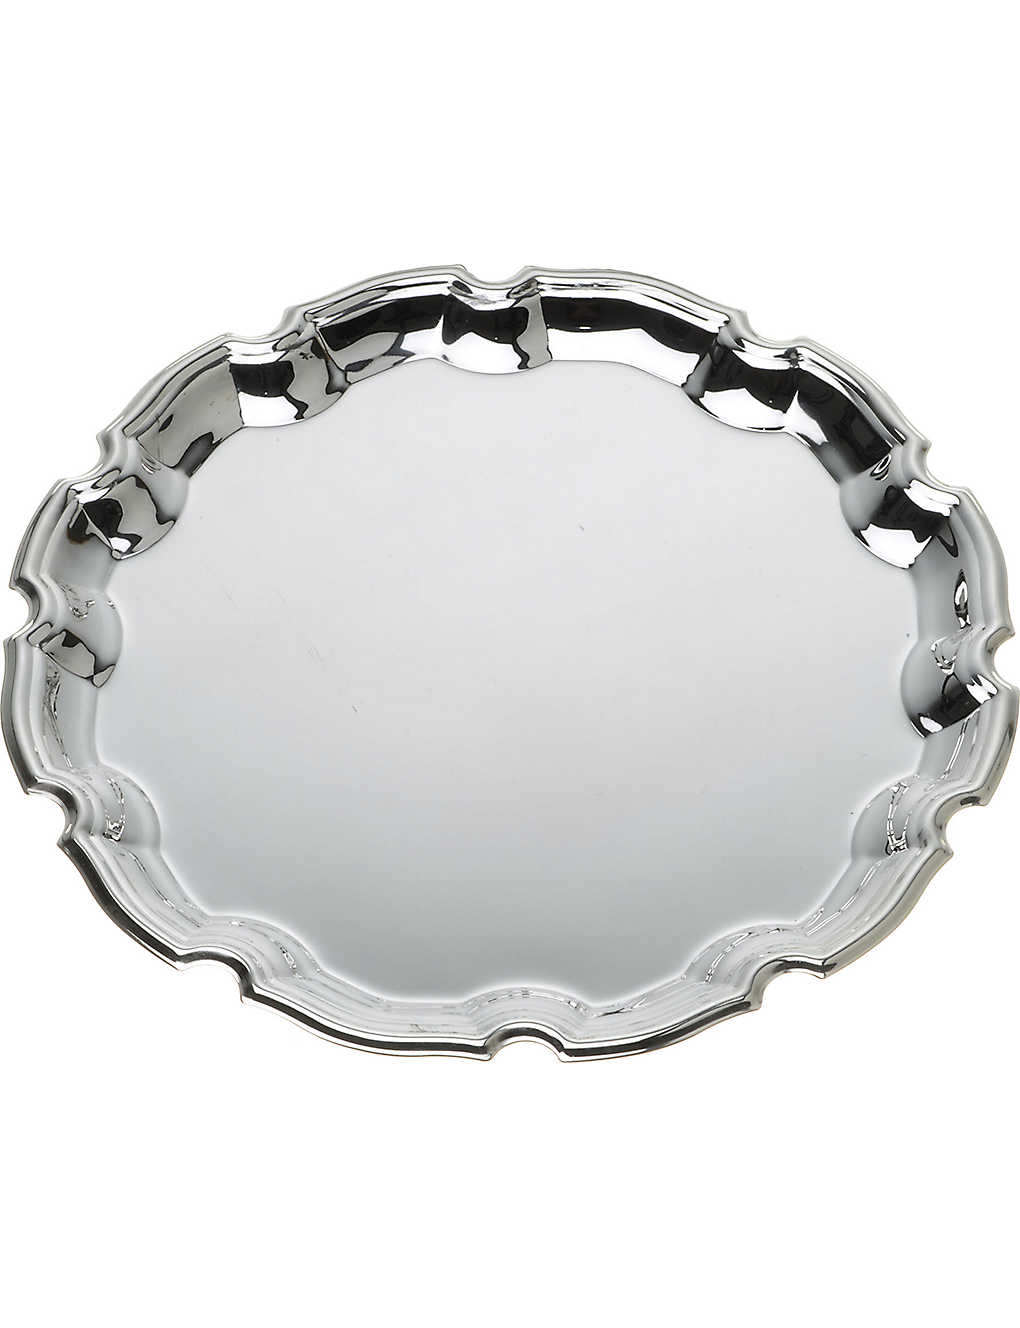 Arthur Price Chippendale 25cm Silver-plated Tray